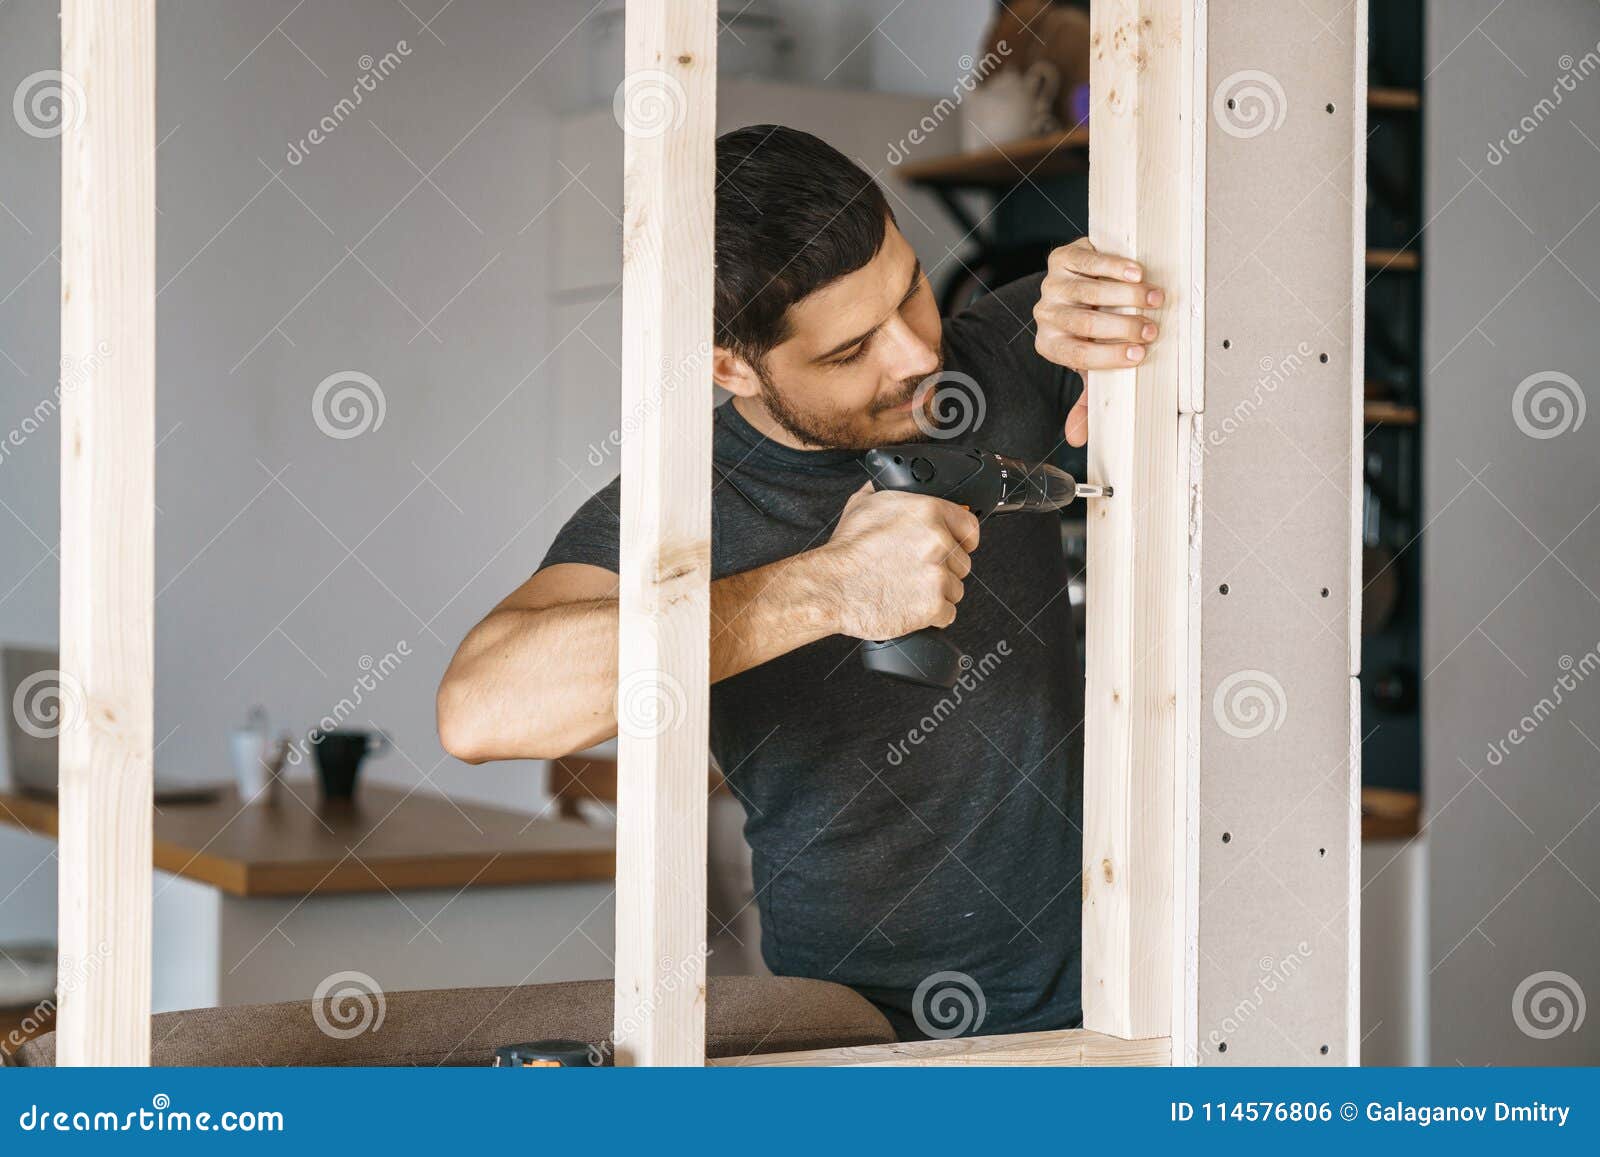 portrait of a man in home clothes with a screwdriver in his hand fixes a wooden construction for a window in his house. repair